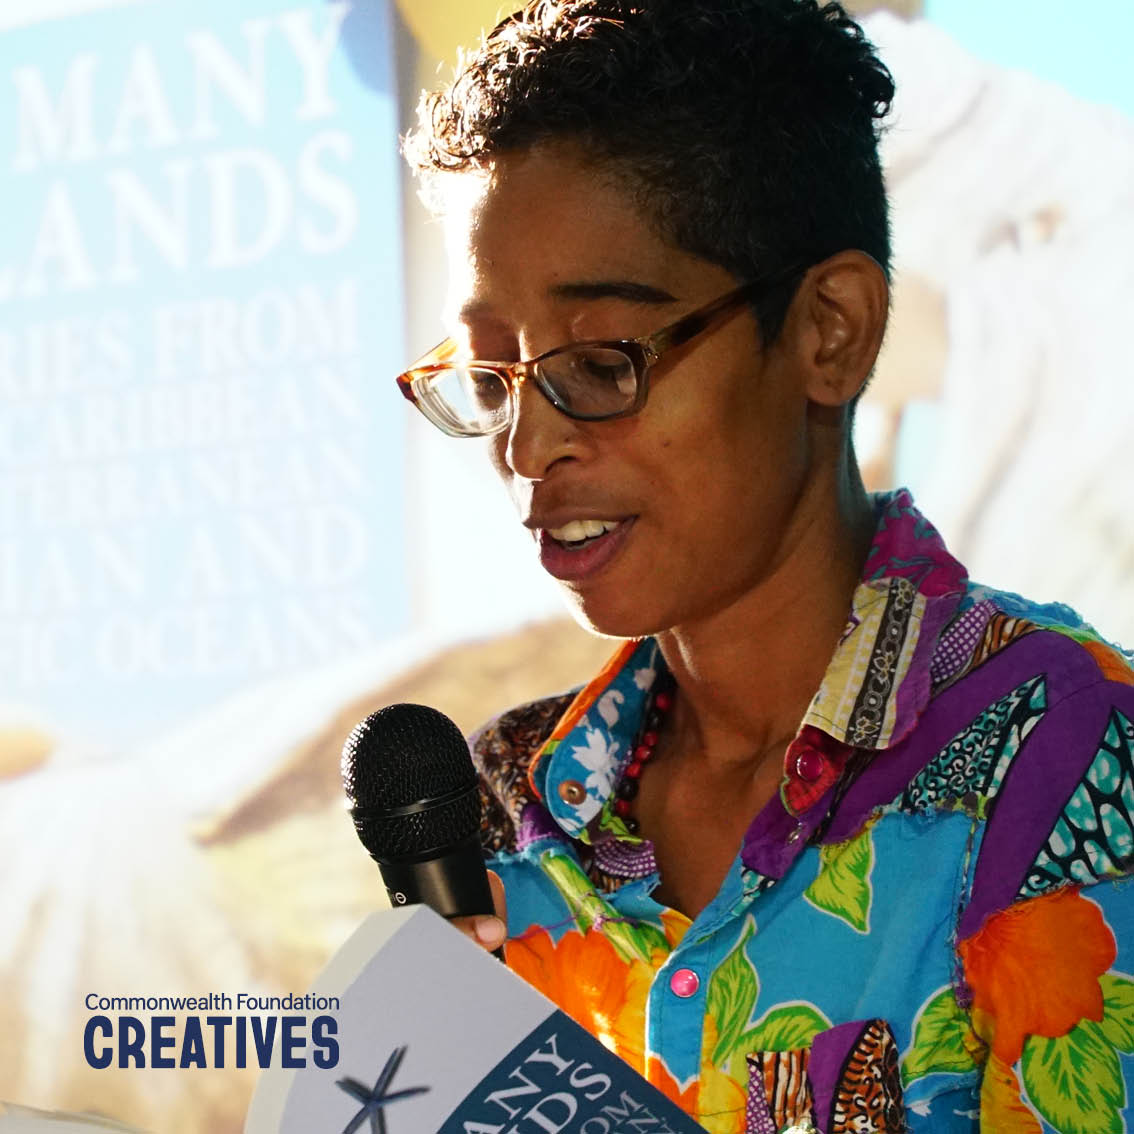 📣 Share with your networks  

Commonwealth Foundation Creatives is a home for storytellers and artists across the Commonwealth.

Follow us to learn about the #CWprize, adda (our online magazine), new opportunities, and more about @commonwealthorg's creative work.